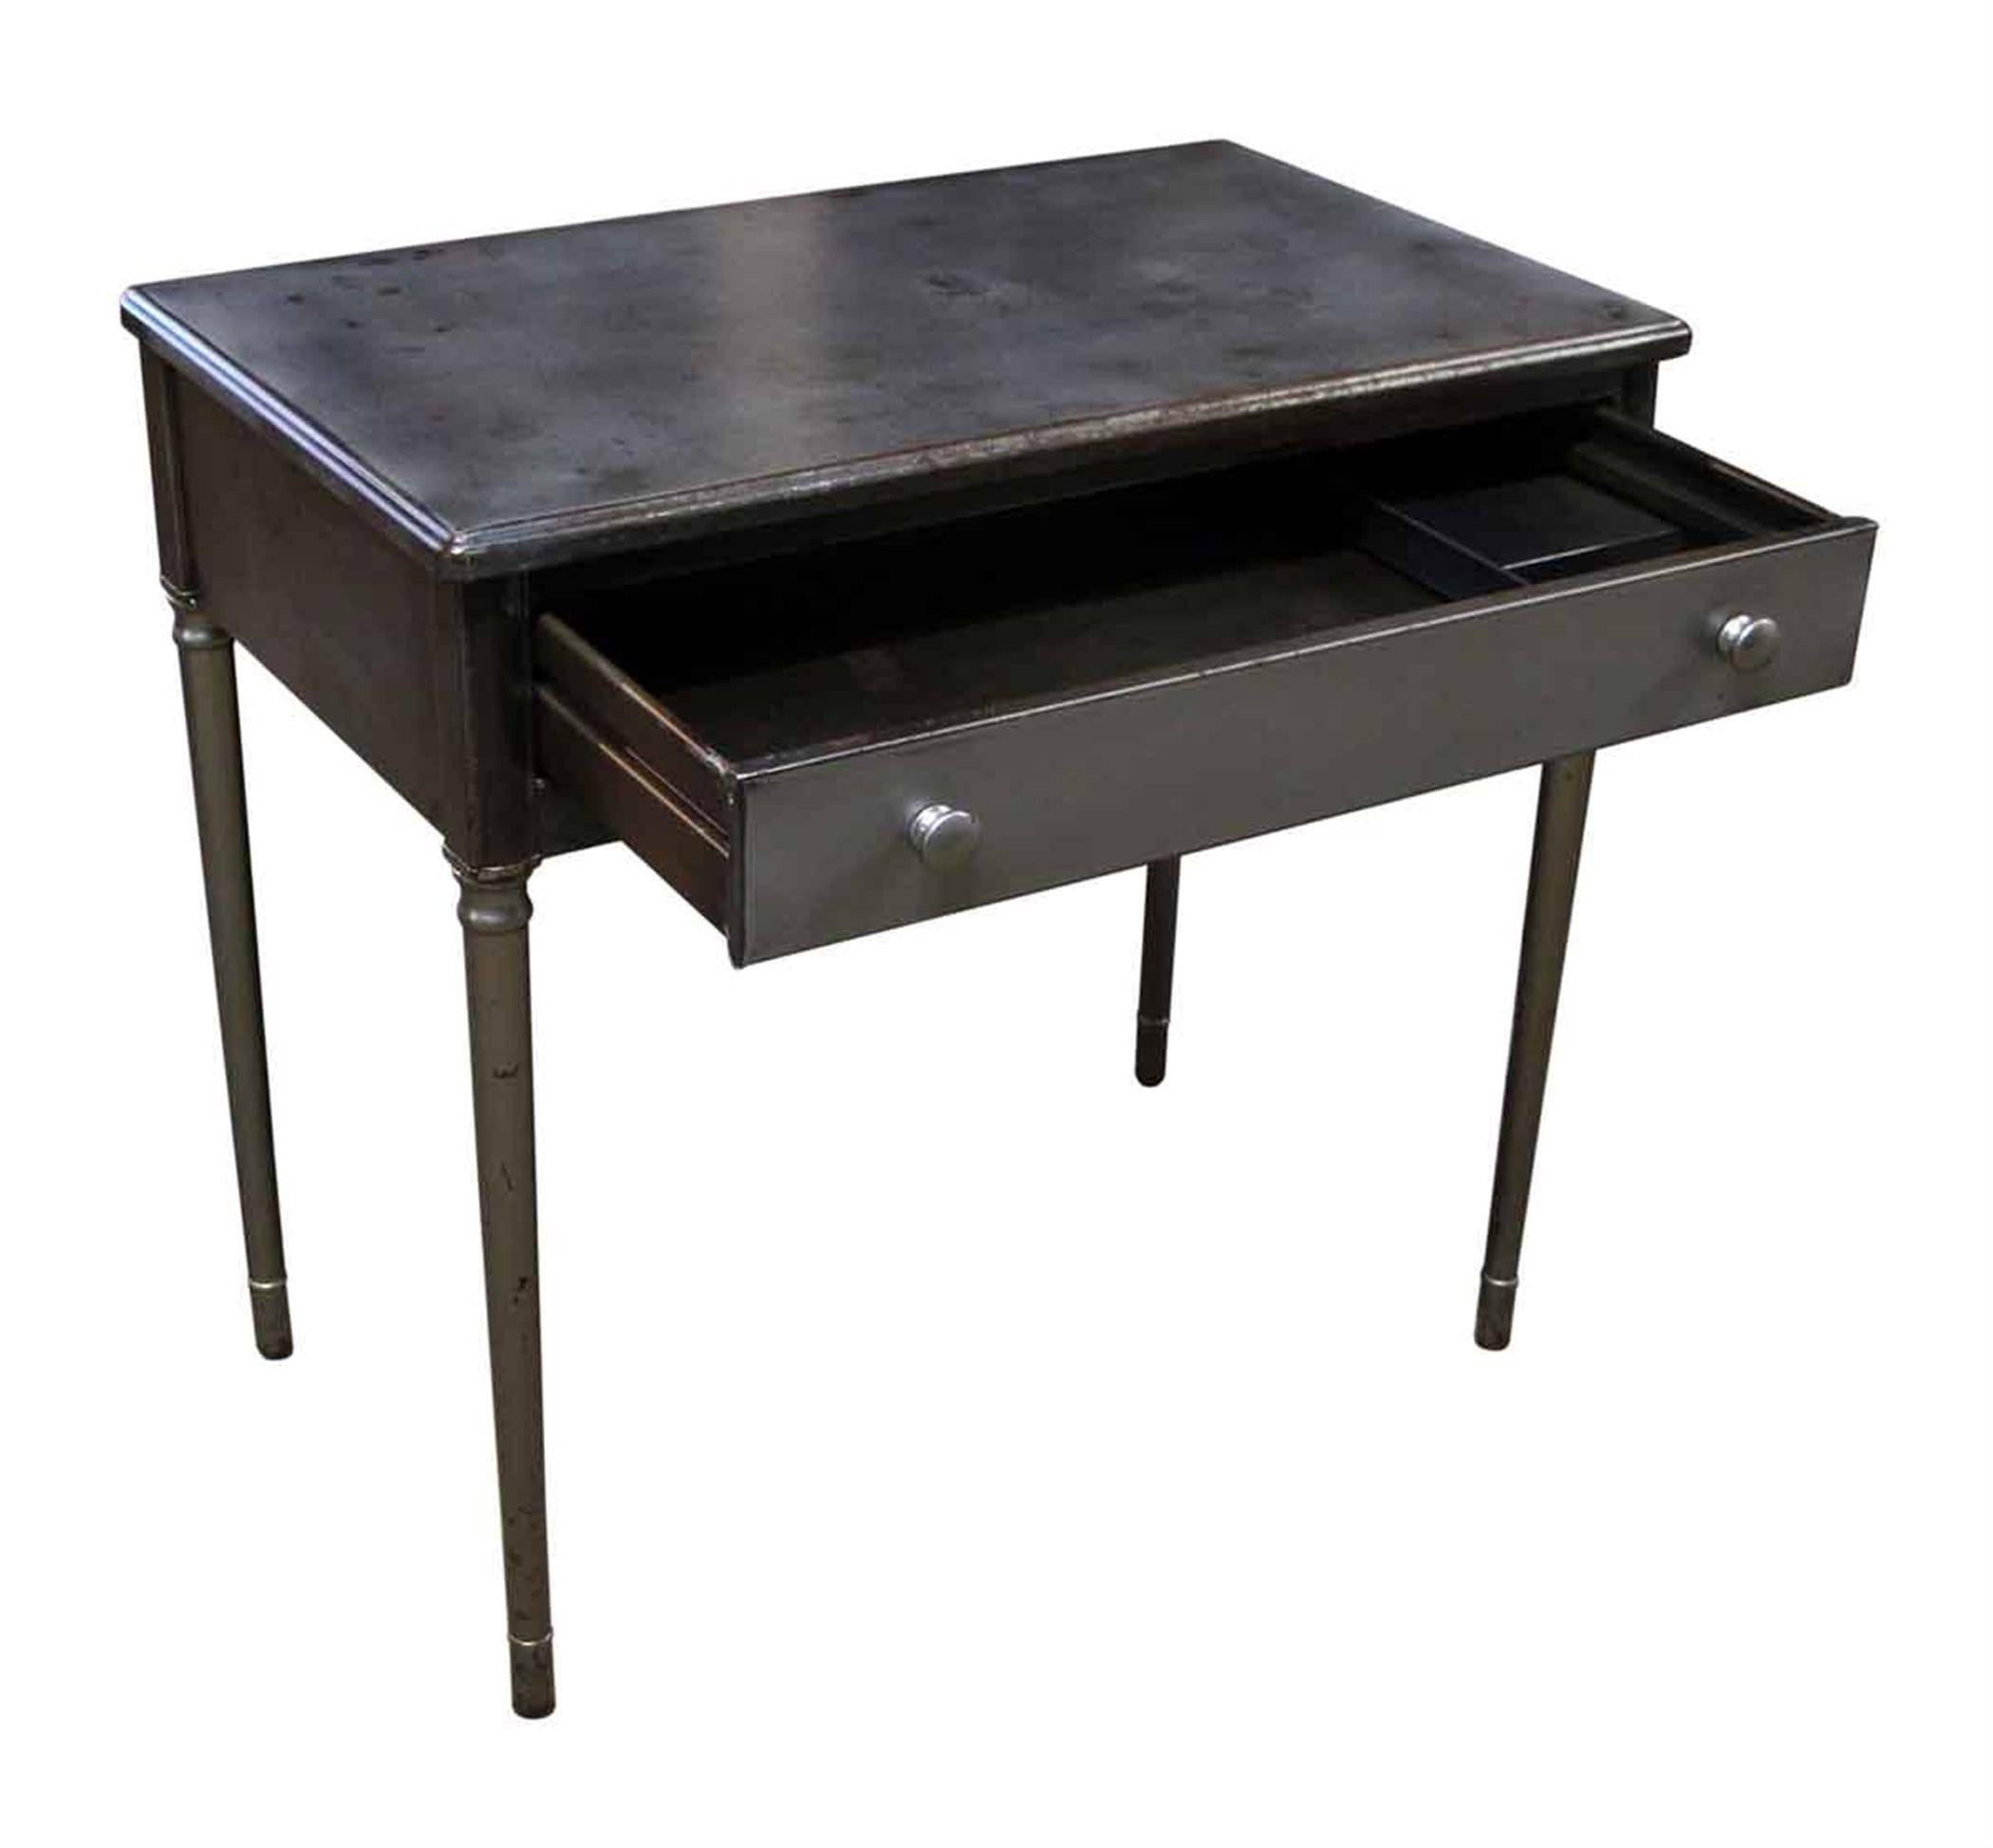 American 1930s Refinished Steel Industrial Desk with One Drawer